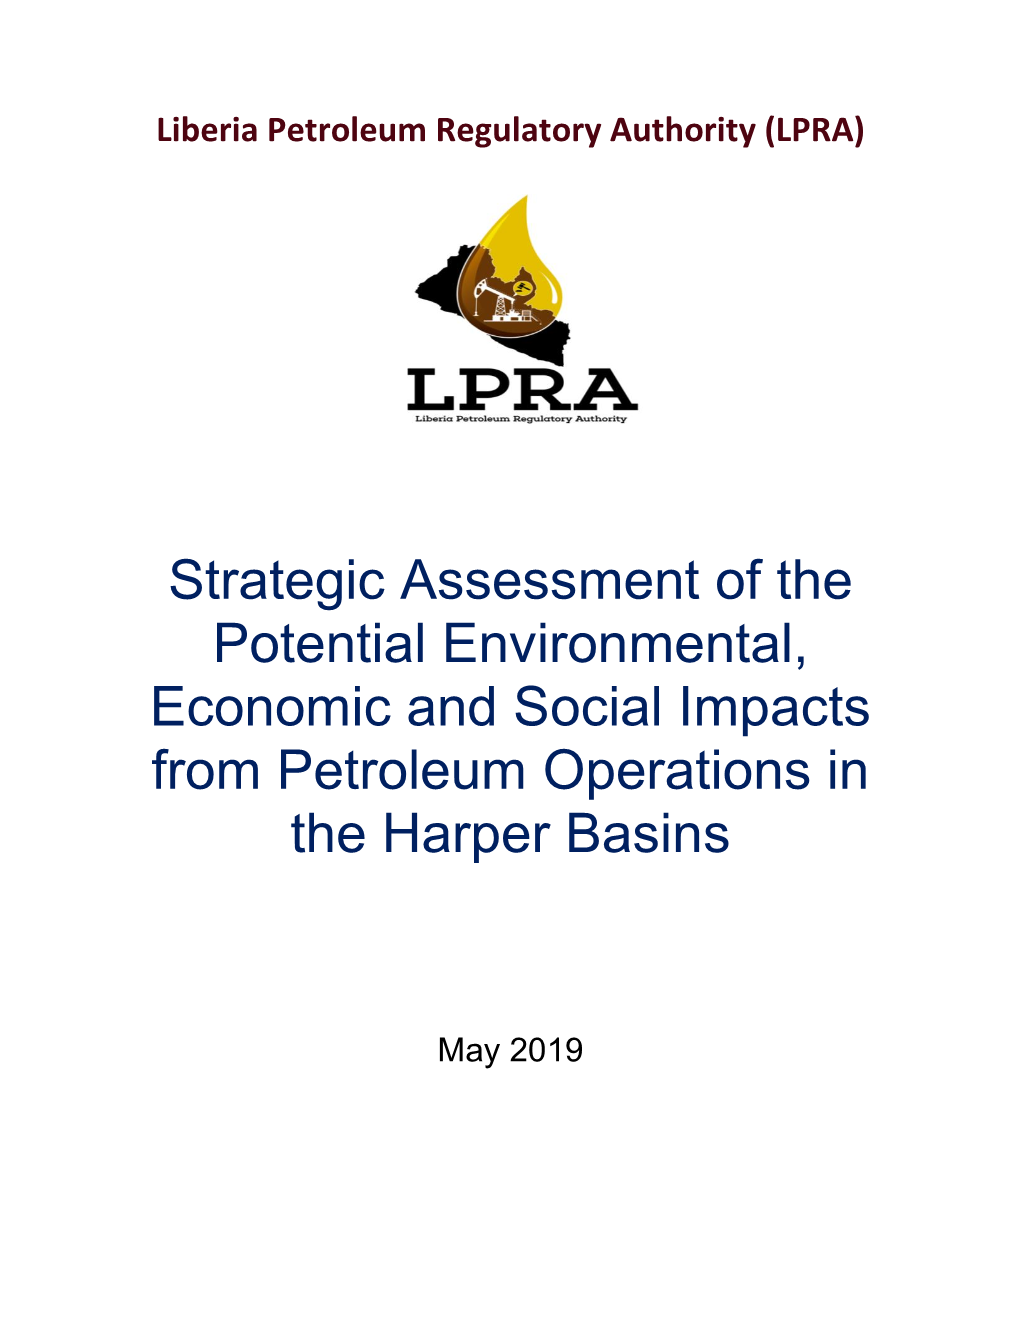 Strategic Assessment of the Potential Environmental, Economic and Social Impacts from Petroleum Operations in the Harper Basins